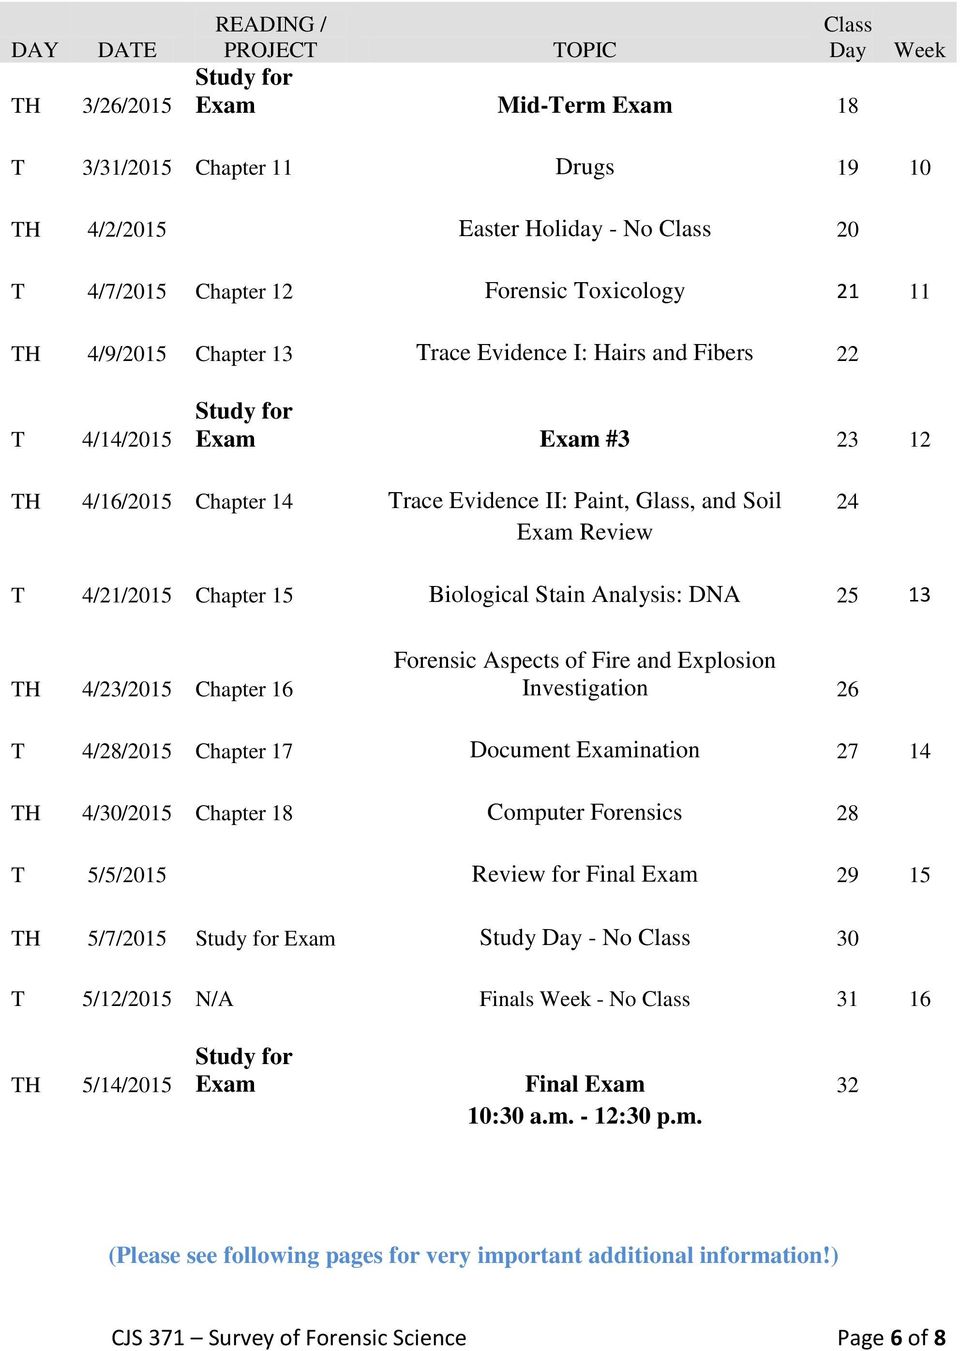 T 4/21/2015 Chapter 15 Biological Stain Analysis: DNA 25 13 TH 4/23/2015 Chapter 16 Forensic Aspects of Fire and Explosion Investigation 26 T 4/28/2015 Chapter 17 Document Examination 27 14 TH